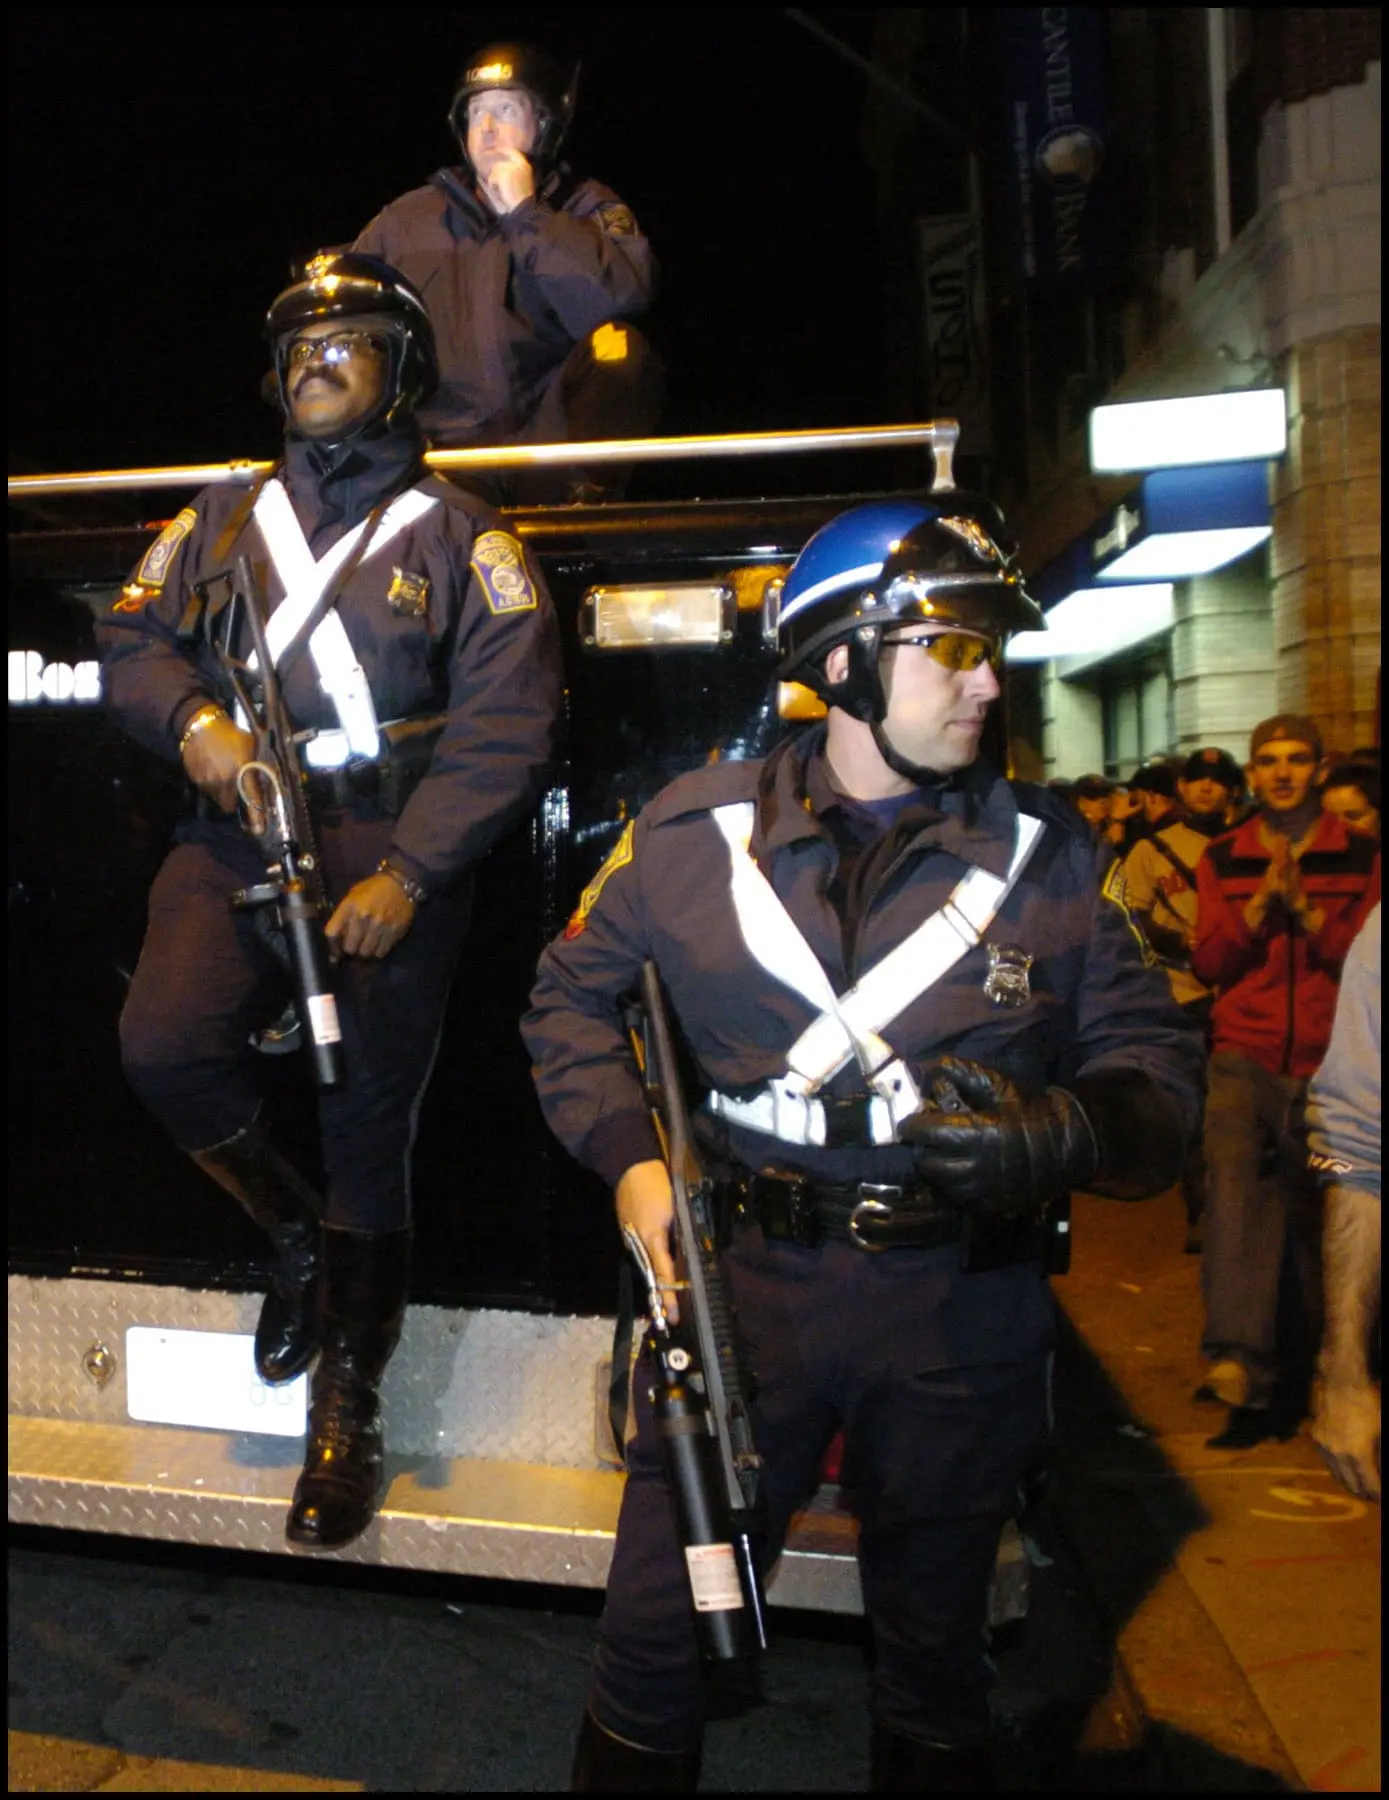 Boston Police officers outside of Fenway Park after Boston won the 2004 American League Championship Series against the New York Yankees.